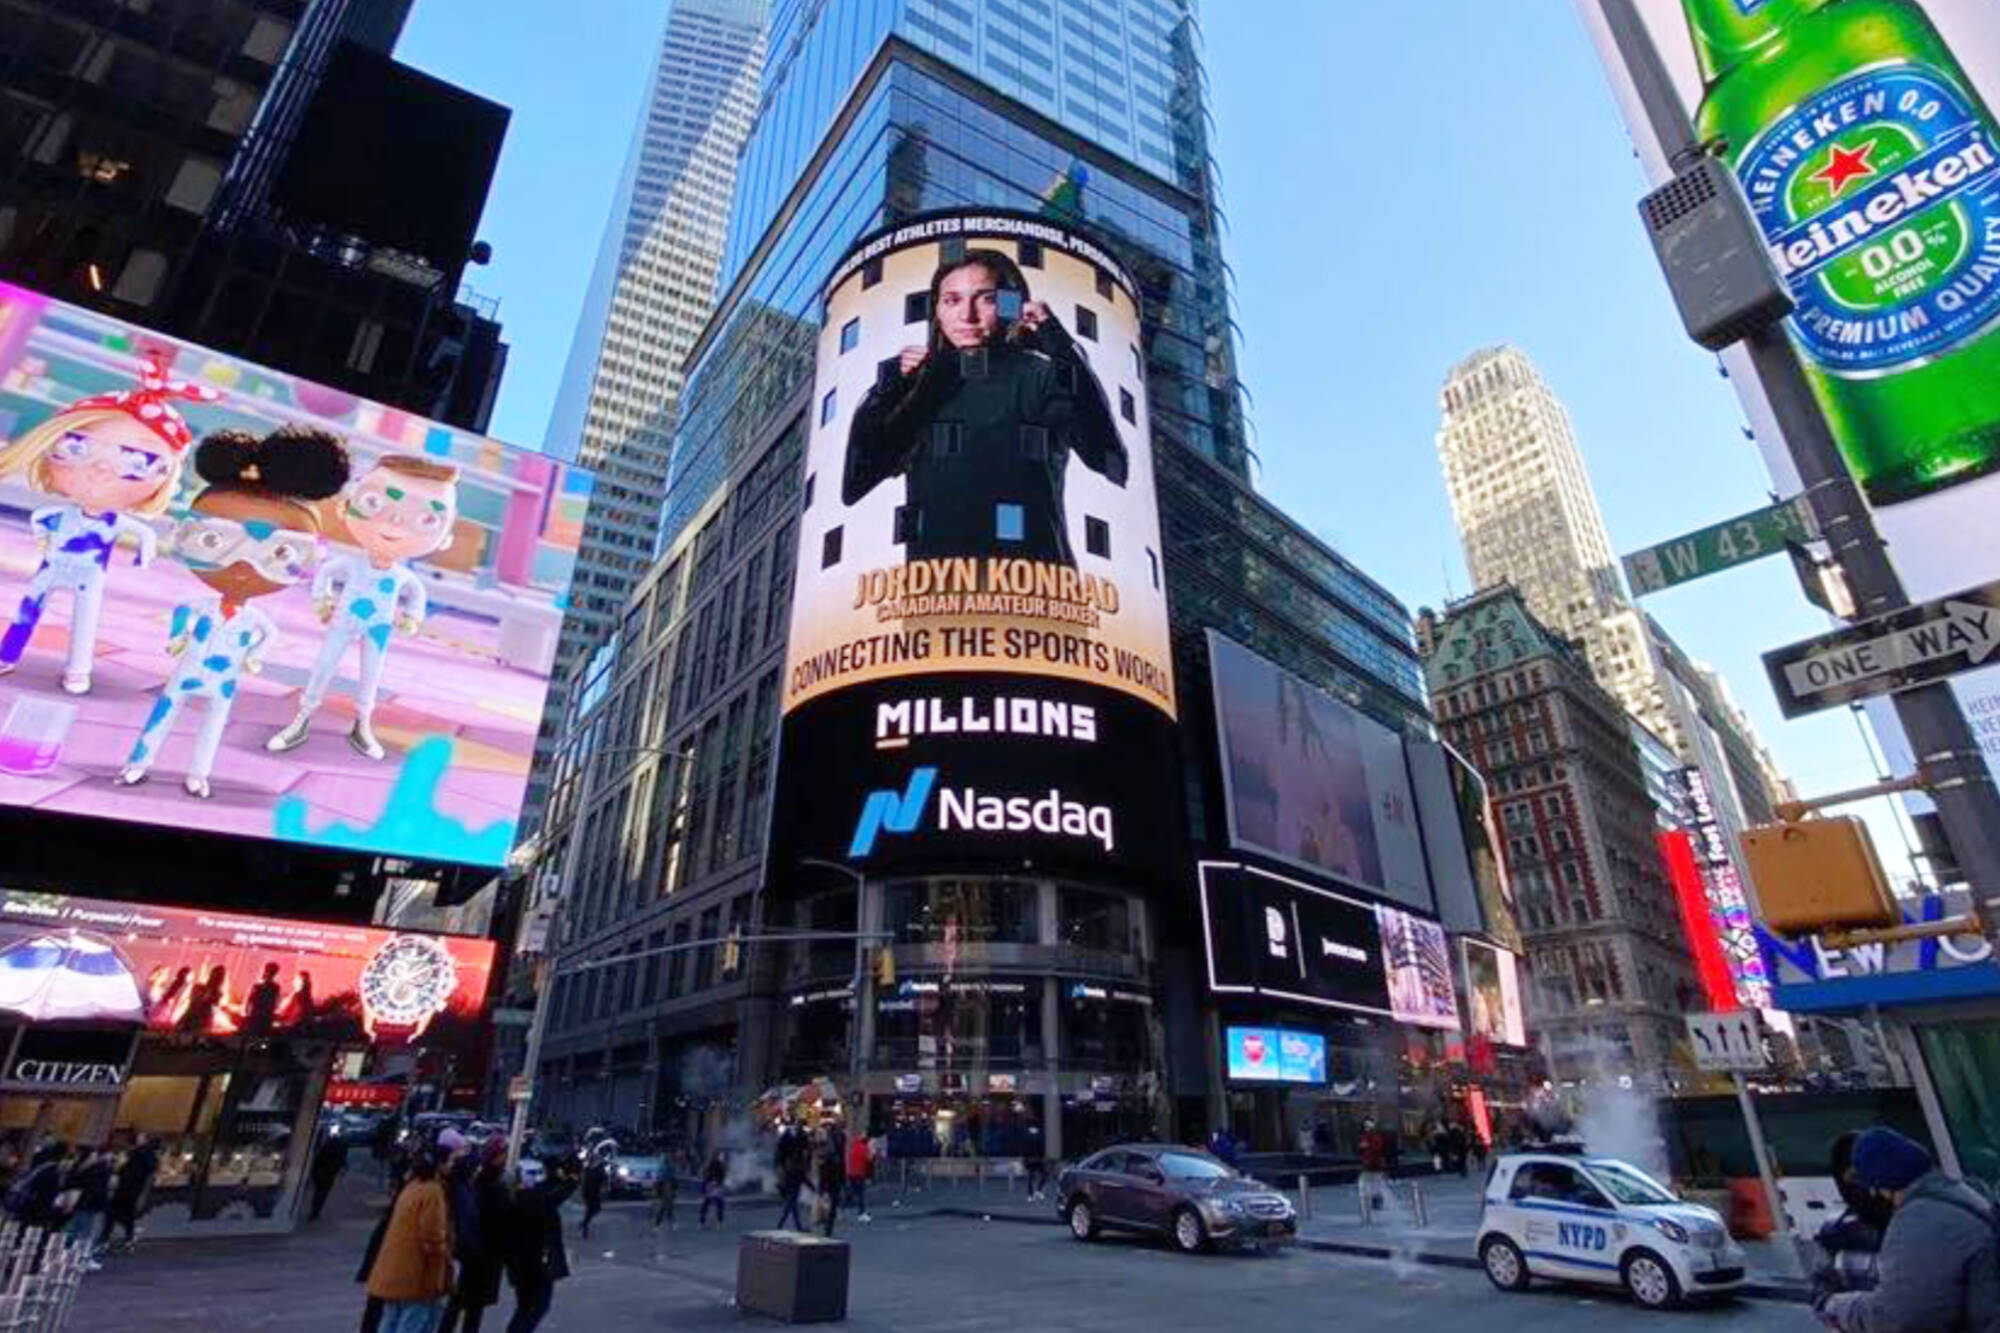 Salmon Arm’s Jordyn Konrad recently appeared on the 120-foot Nasdaq billboard in New York’s Times Square in a promotion for millions.co. (Contributed)